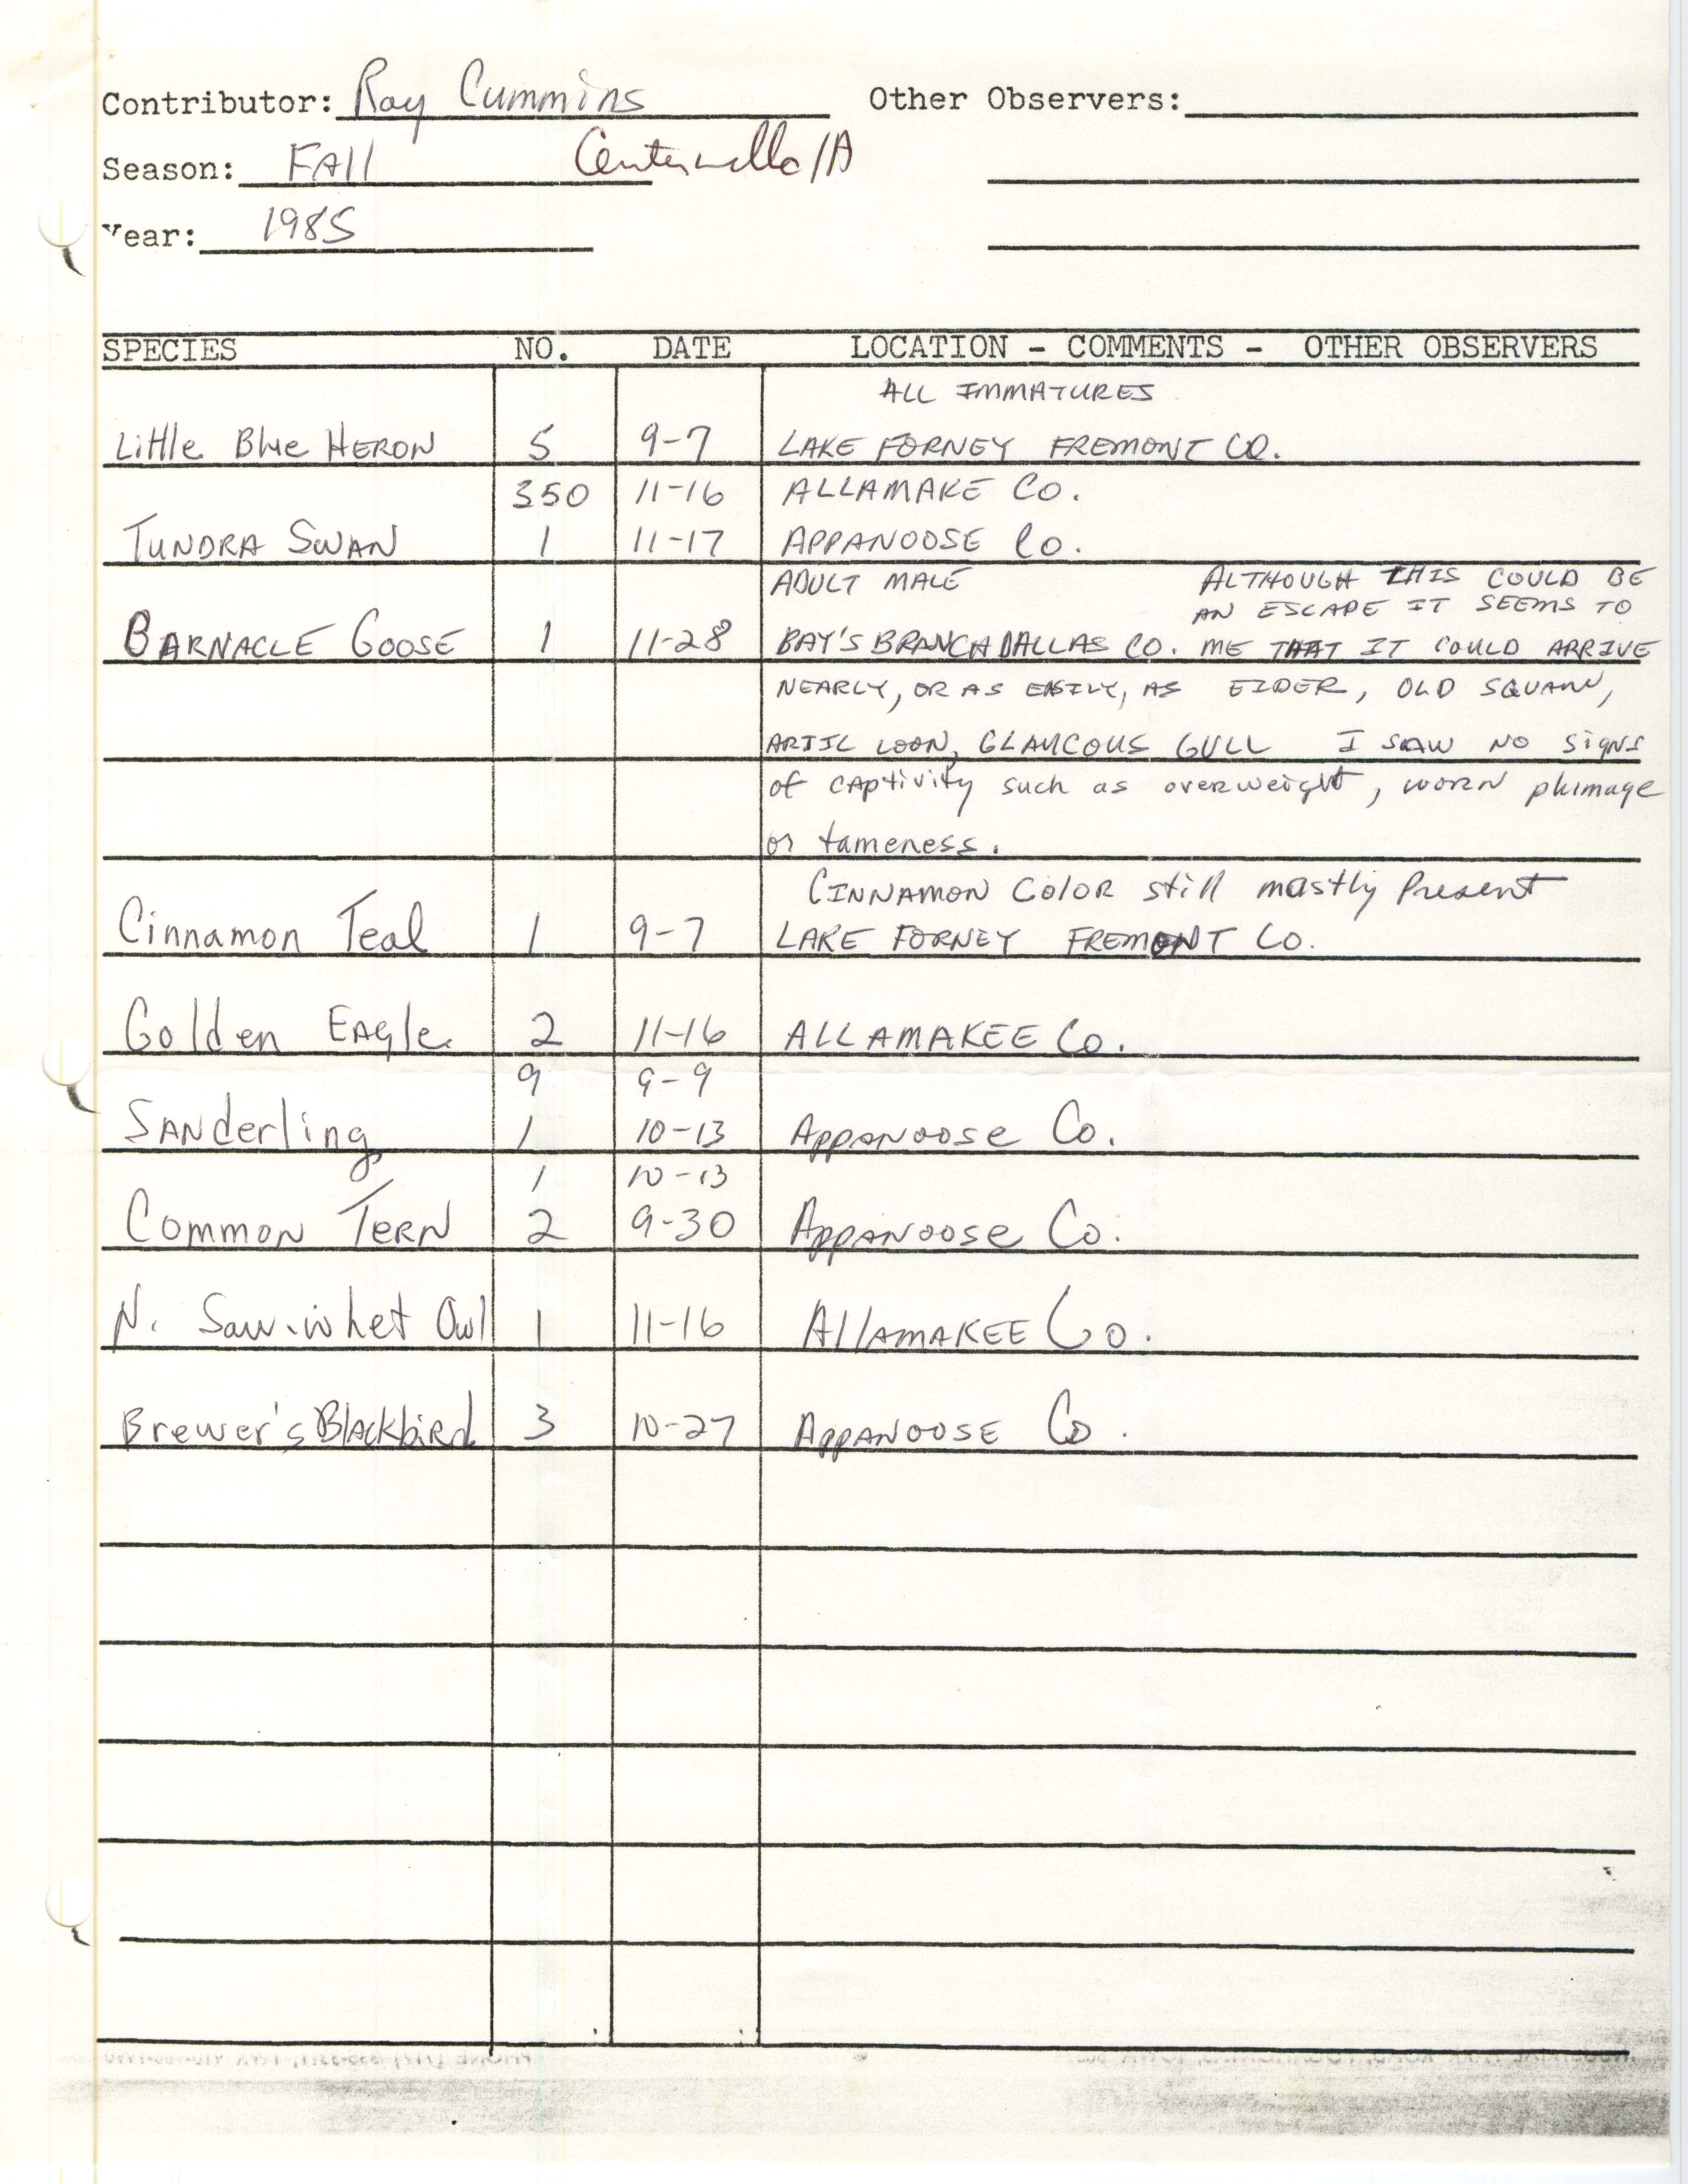 Annotated bird sighting list for Fall 1985 compiled by Ray Cummins